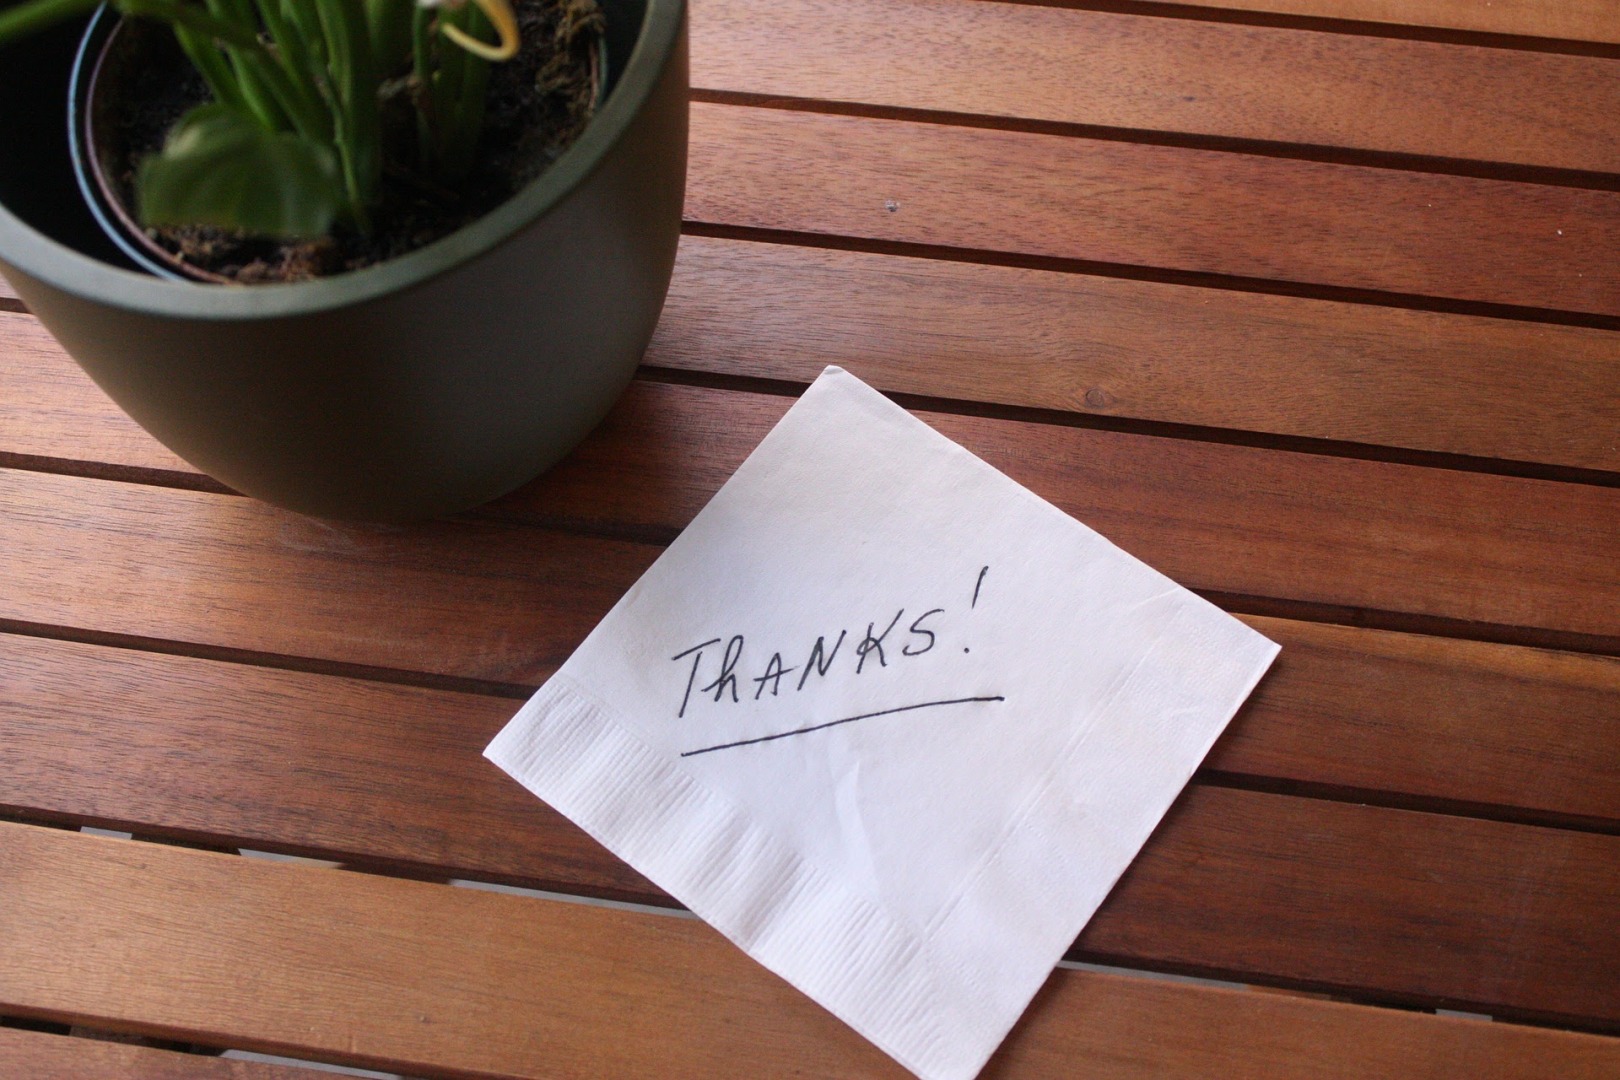 6 Good Ways To Show Appreciation To Your Donors